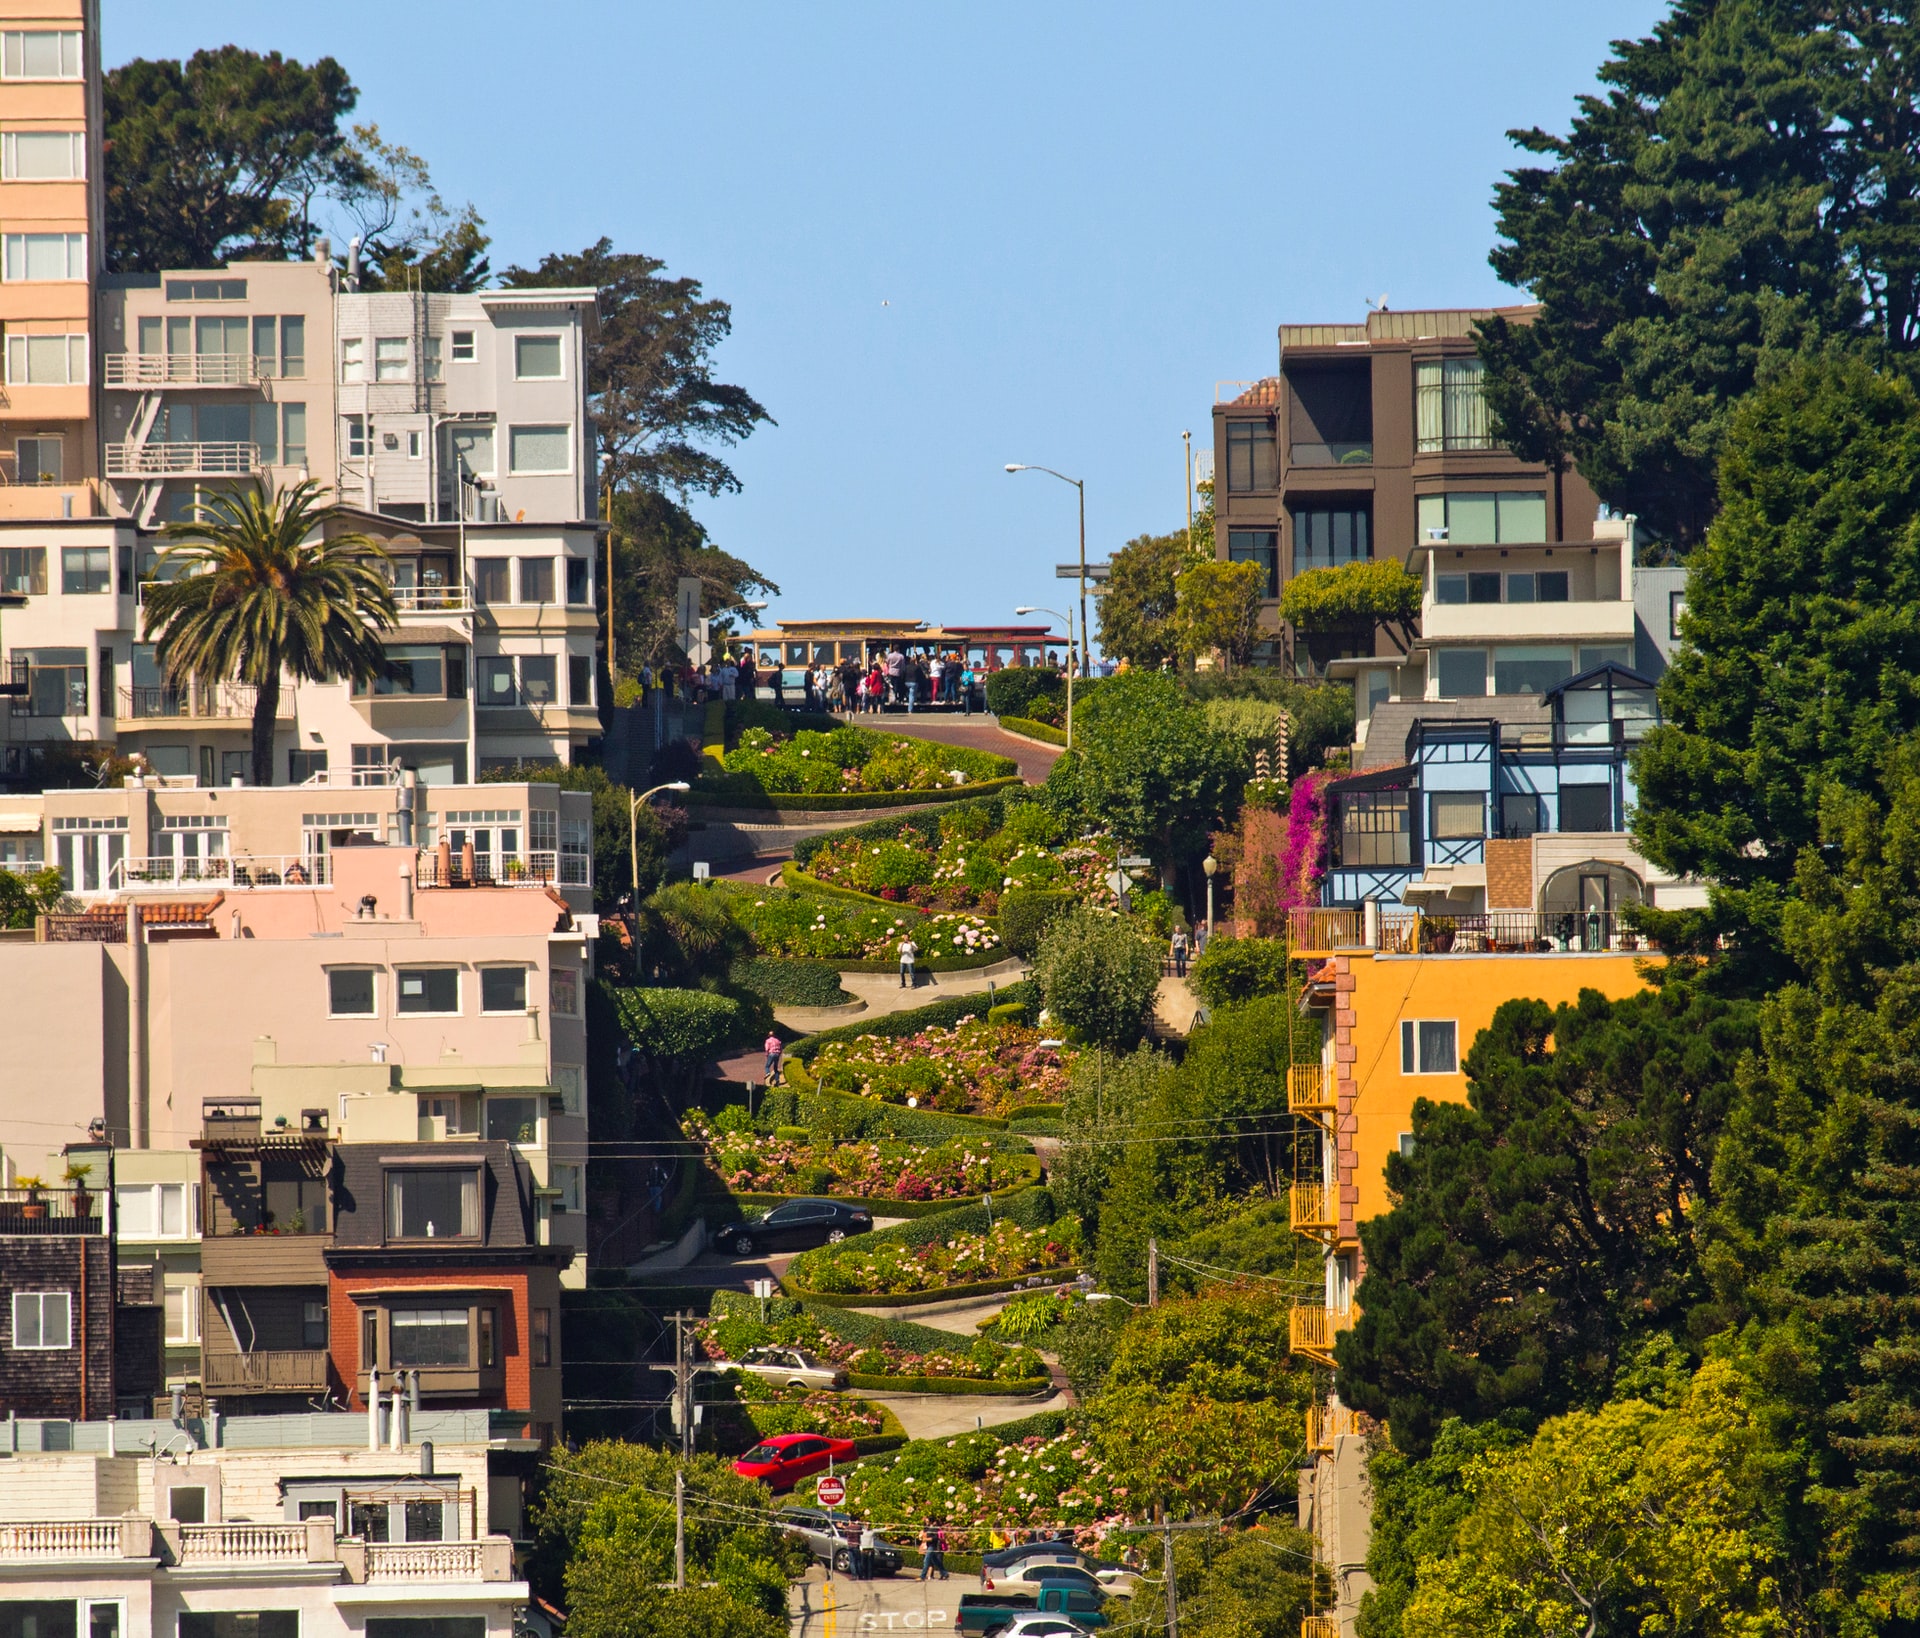 Lombard Street showing the eight turns between houses